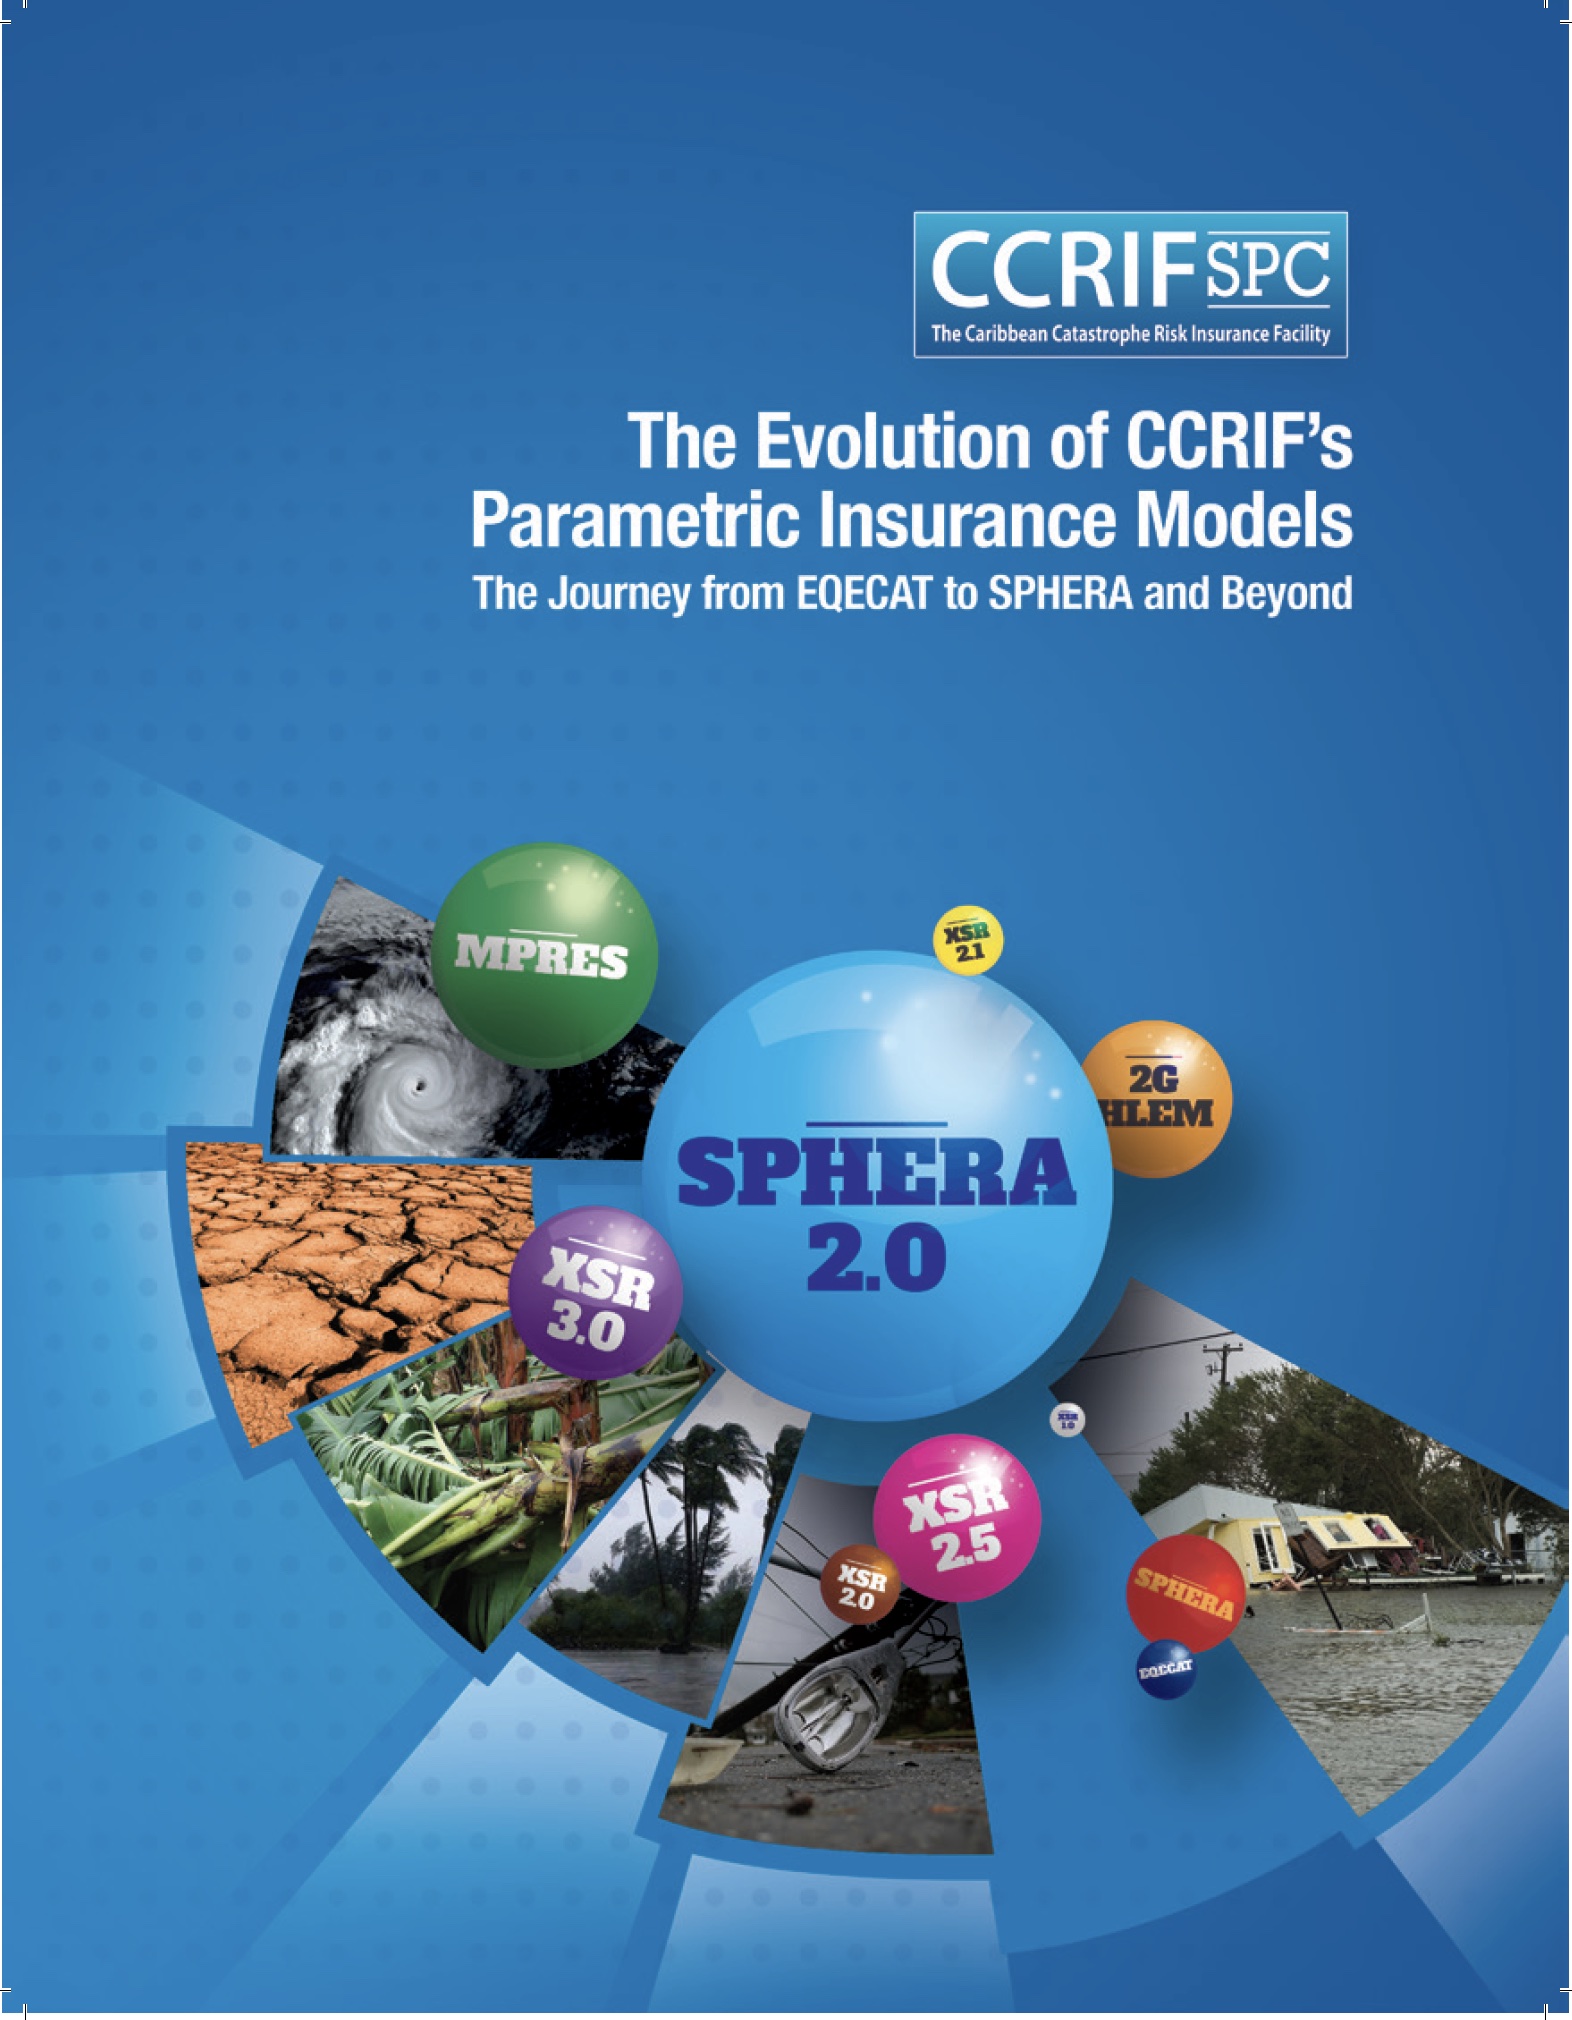 The Evolution of CCRIF's Parametric Insurance Models